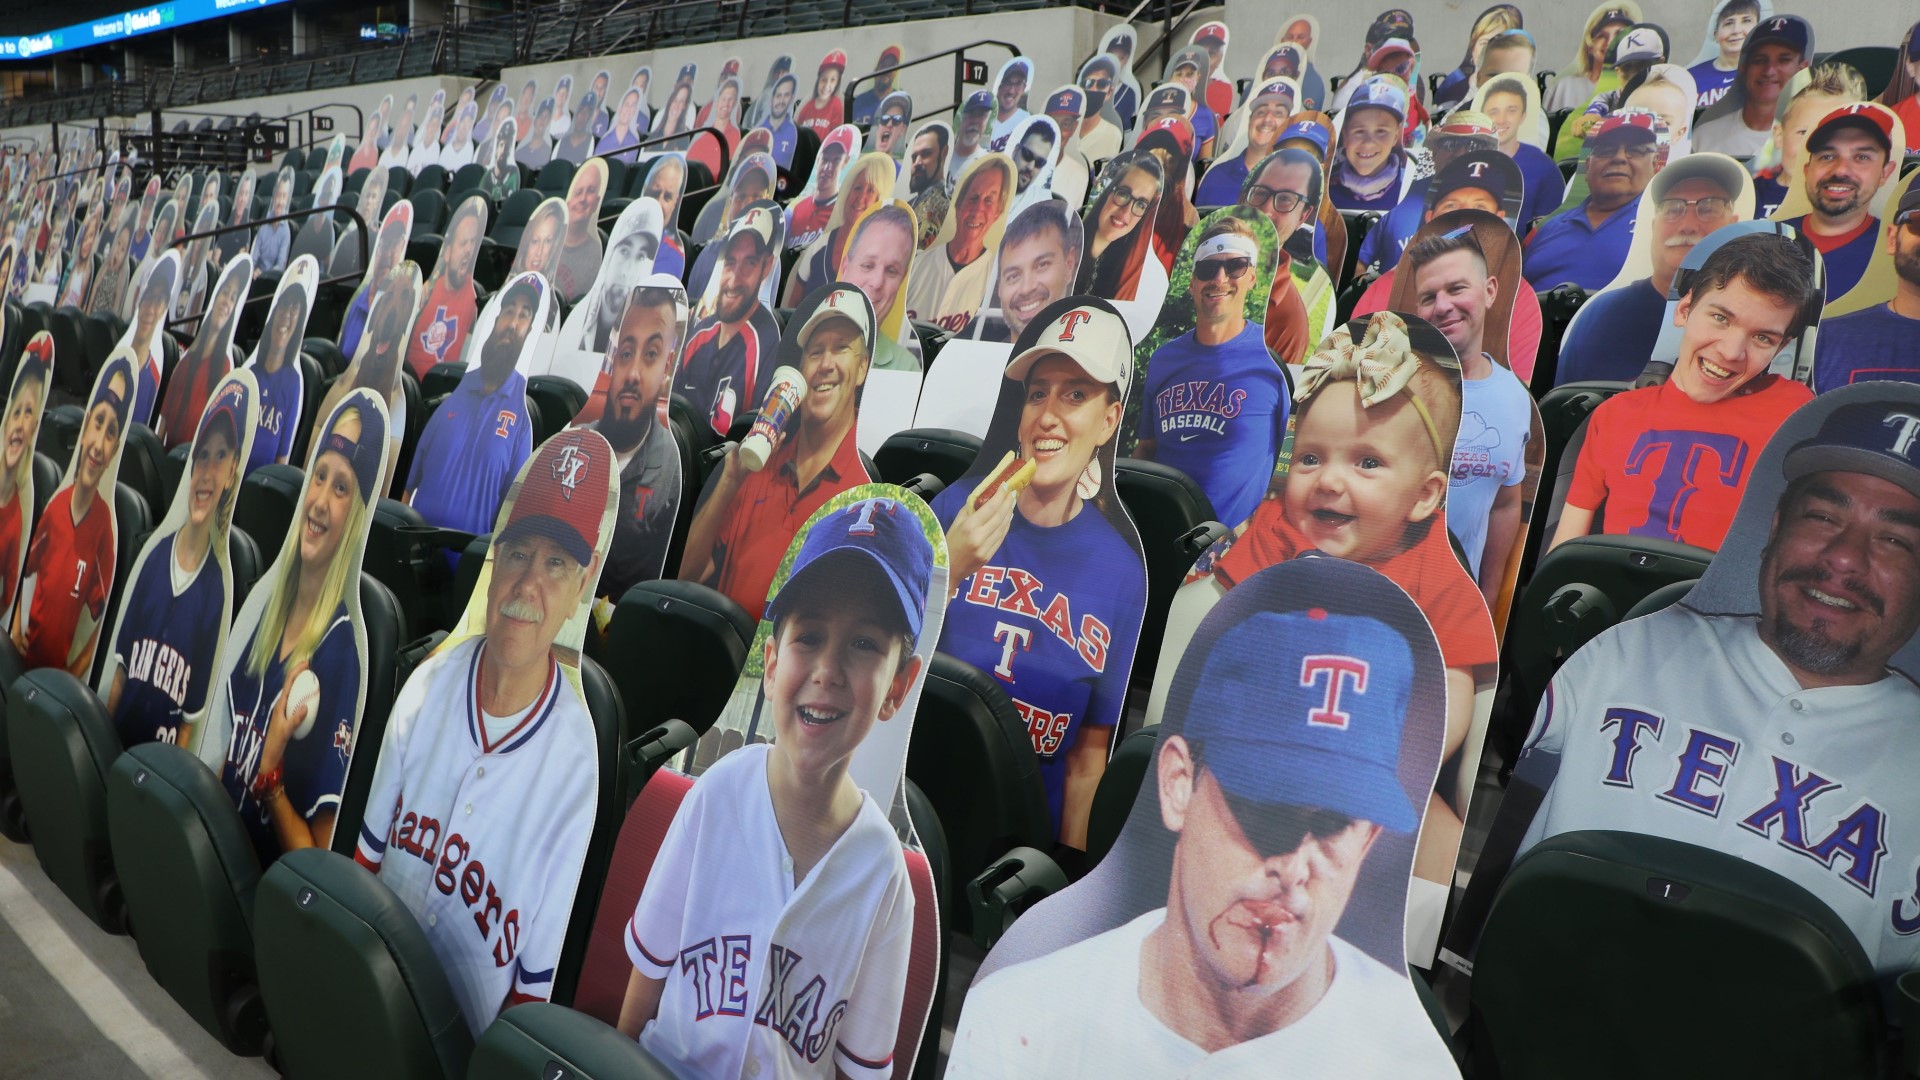 2,700 Texas Rangers fans have cardboard cutouts, or "DoppleRangers," in the stands for opening night at Globe Life Field. No real fans will be in attendance.